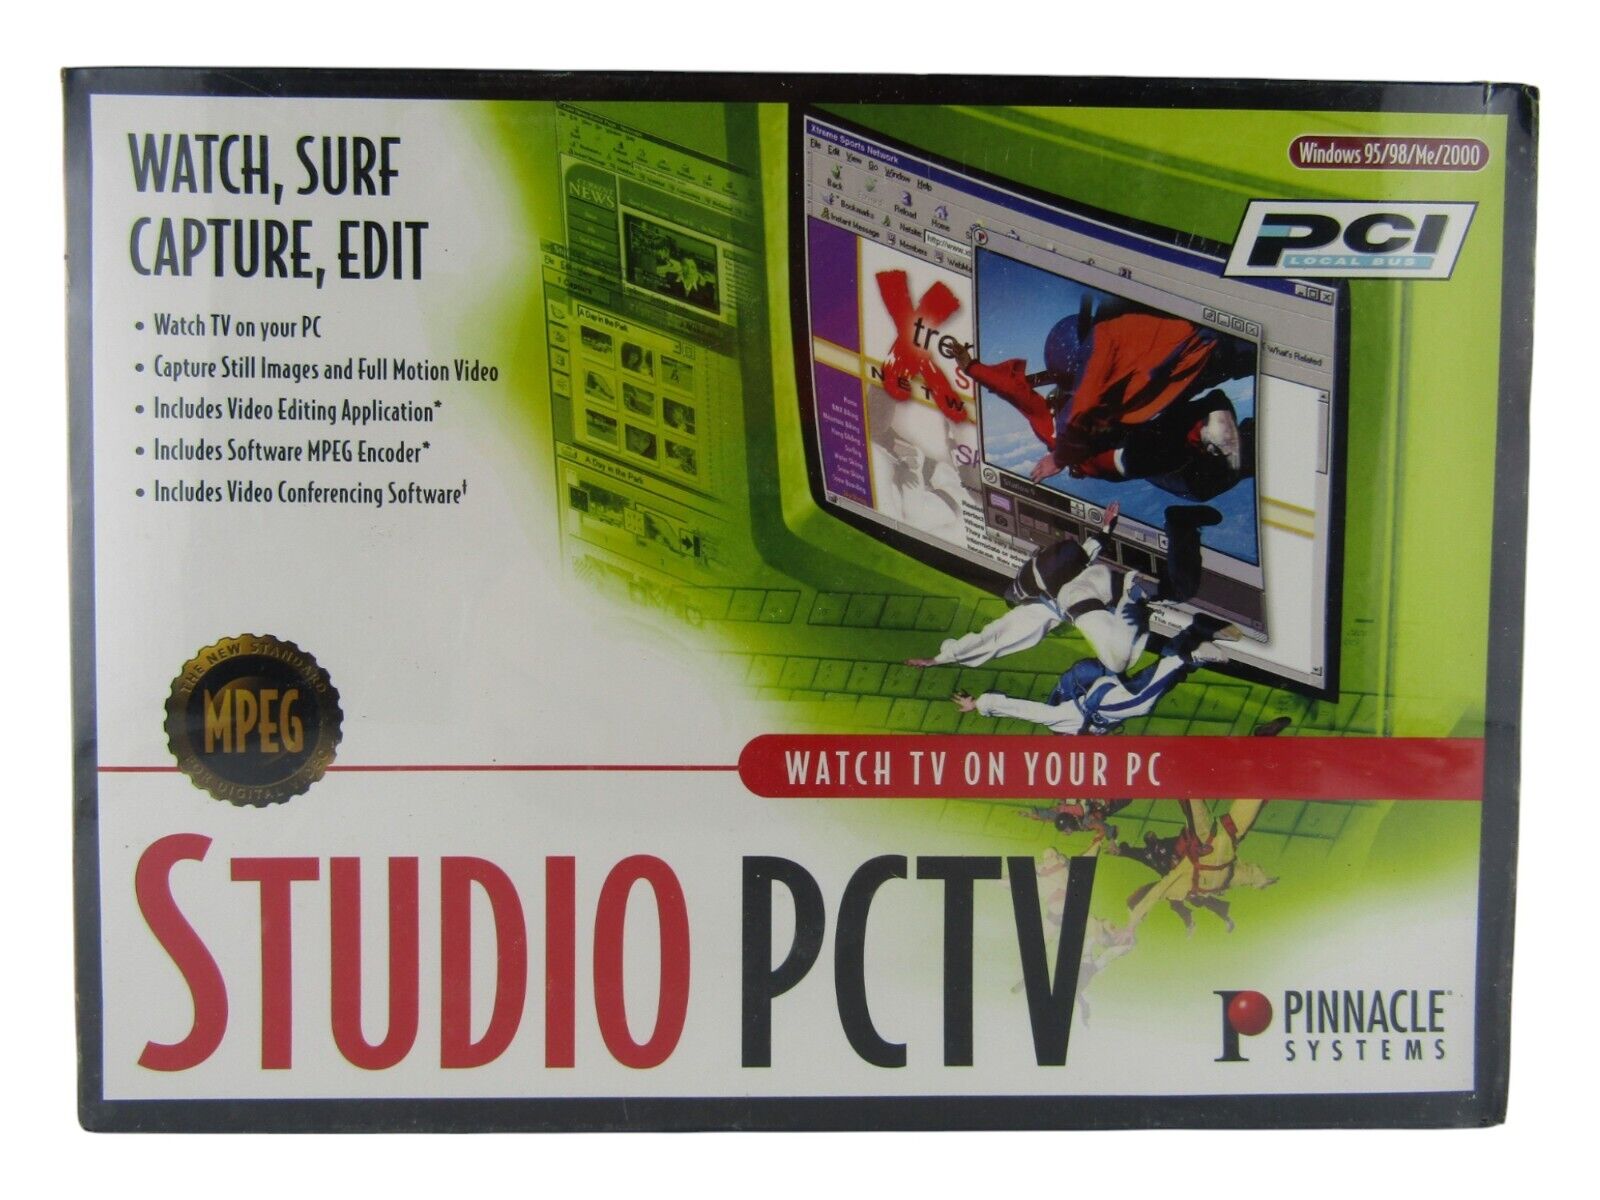 Pinnacle Systems Studio PCTV Windows 95 98 2000 Watch TV On Your PC